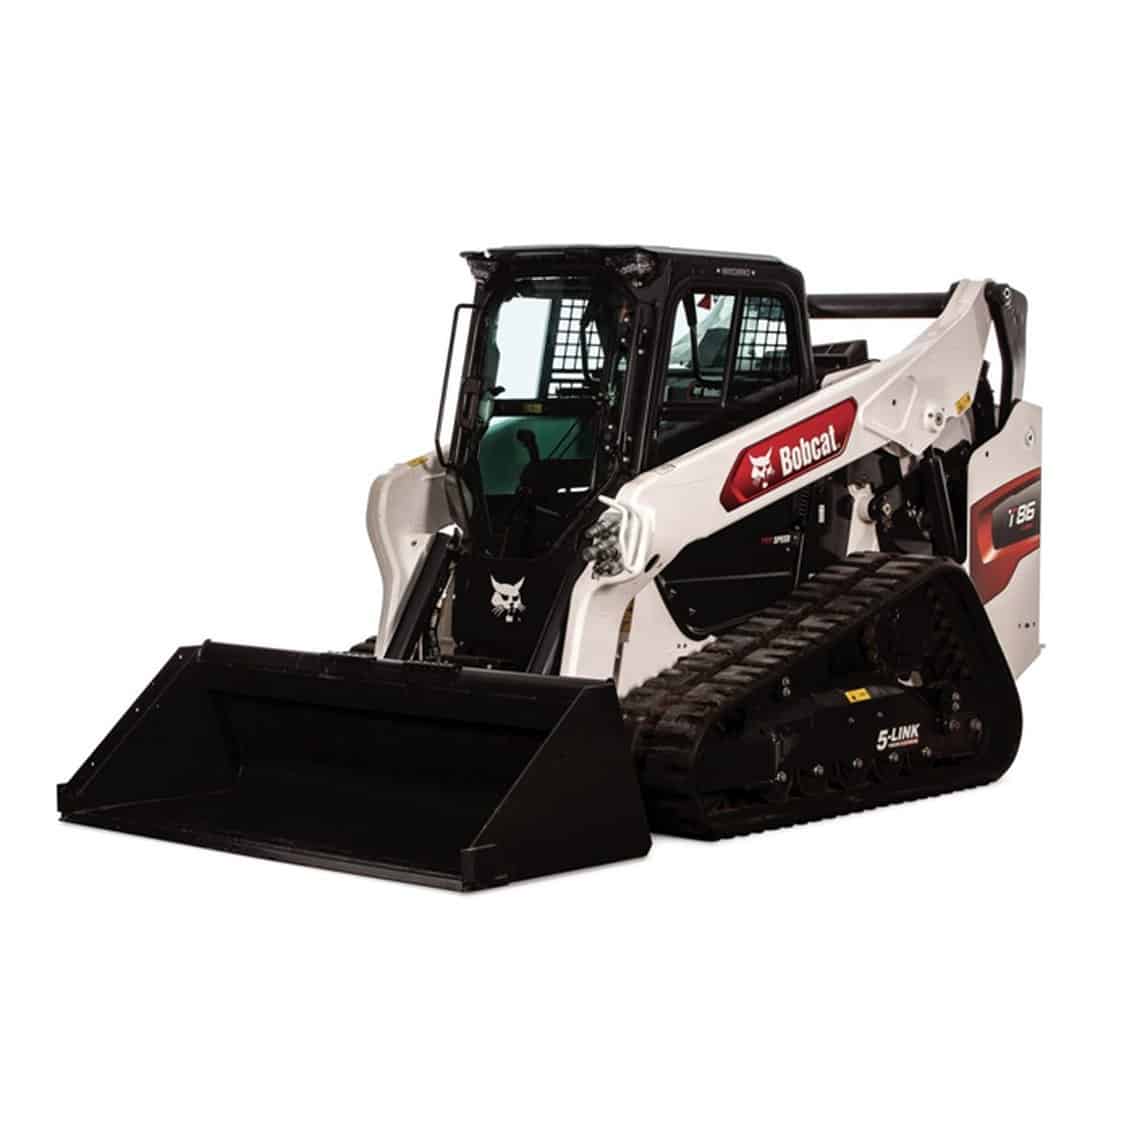 Browse Specs and more for the Bobcat T86 Compact Track Loader - Bobcat of Houston